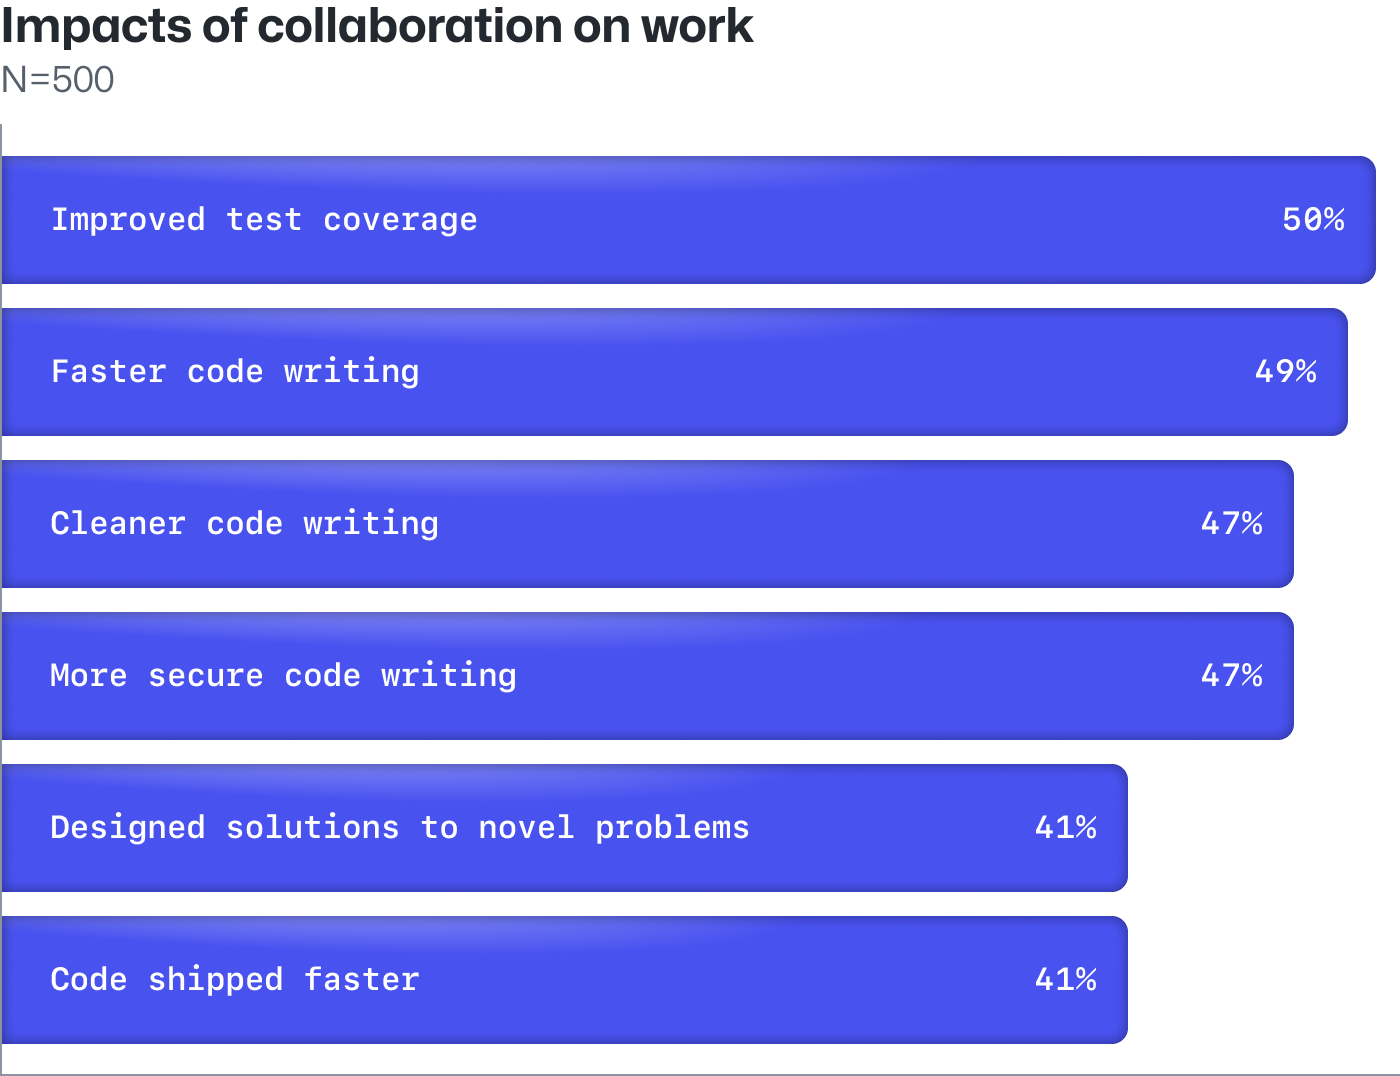 Developers in a survey report that collaboration positively impacts how they write code, how fast they can ship it, and more.